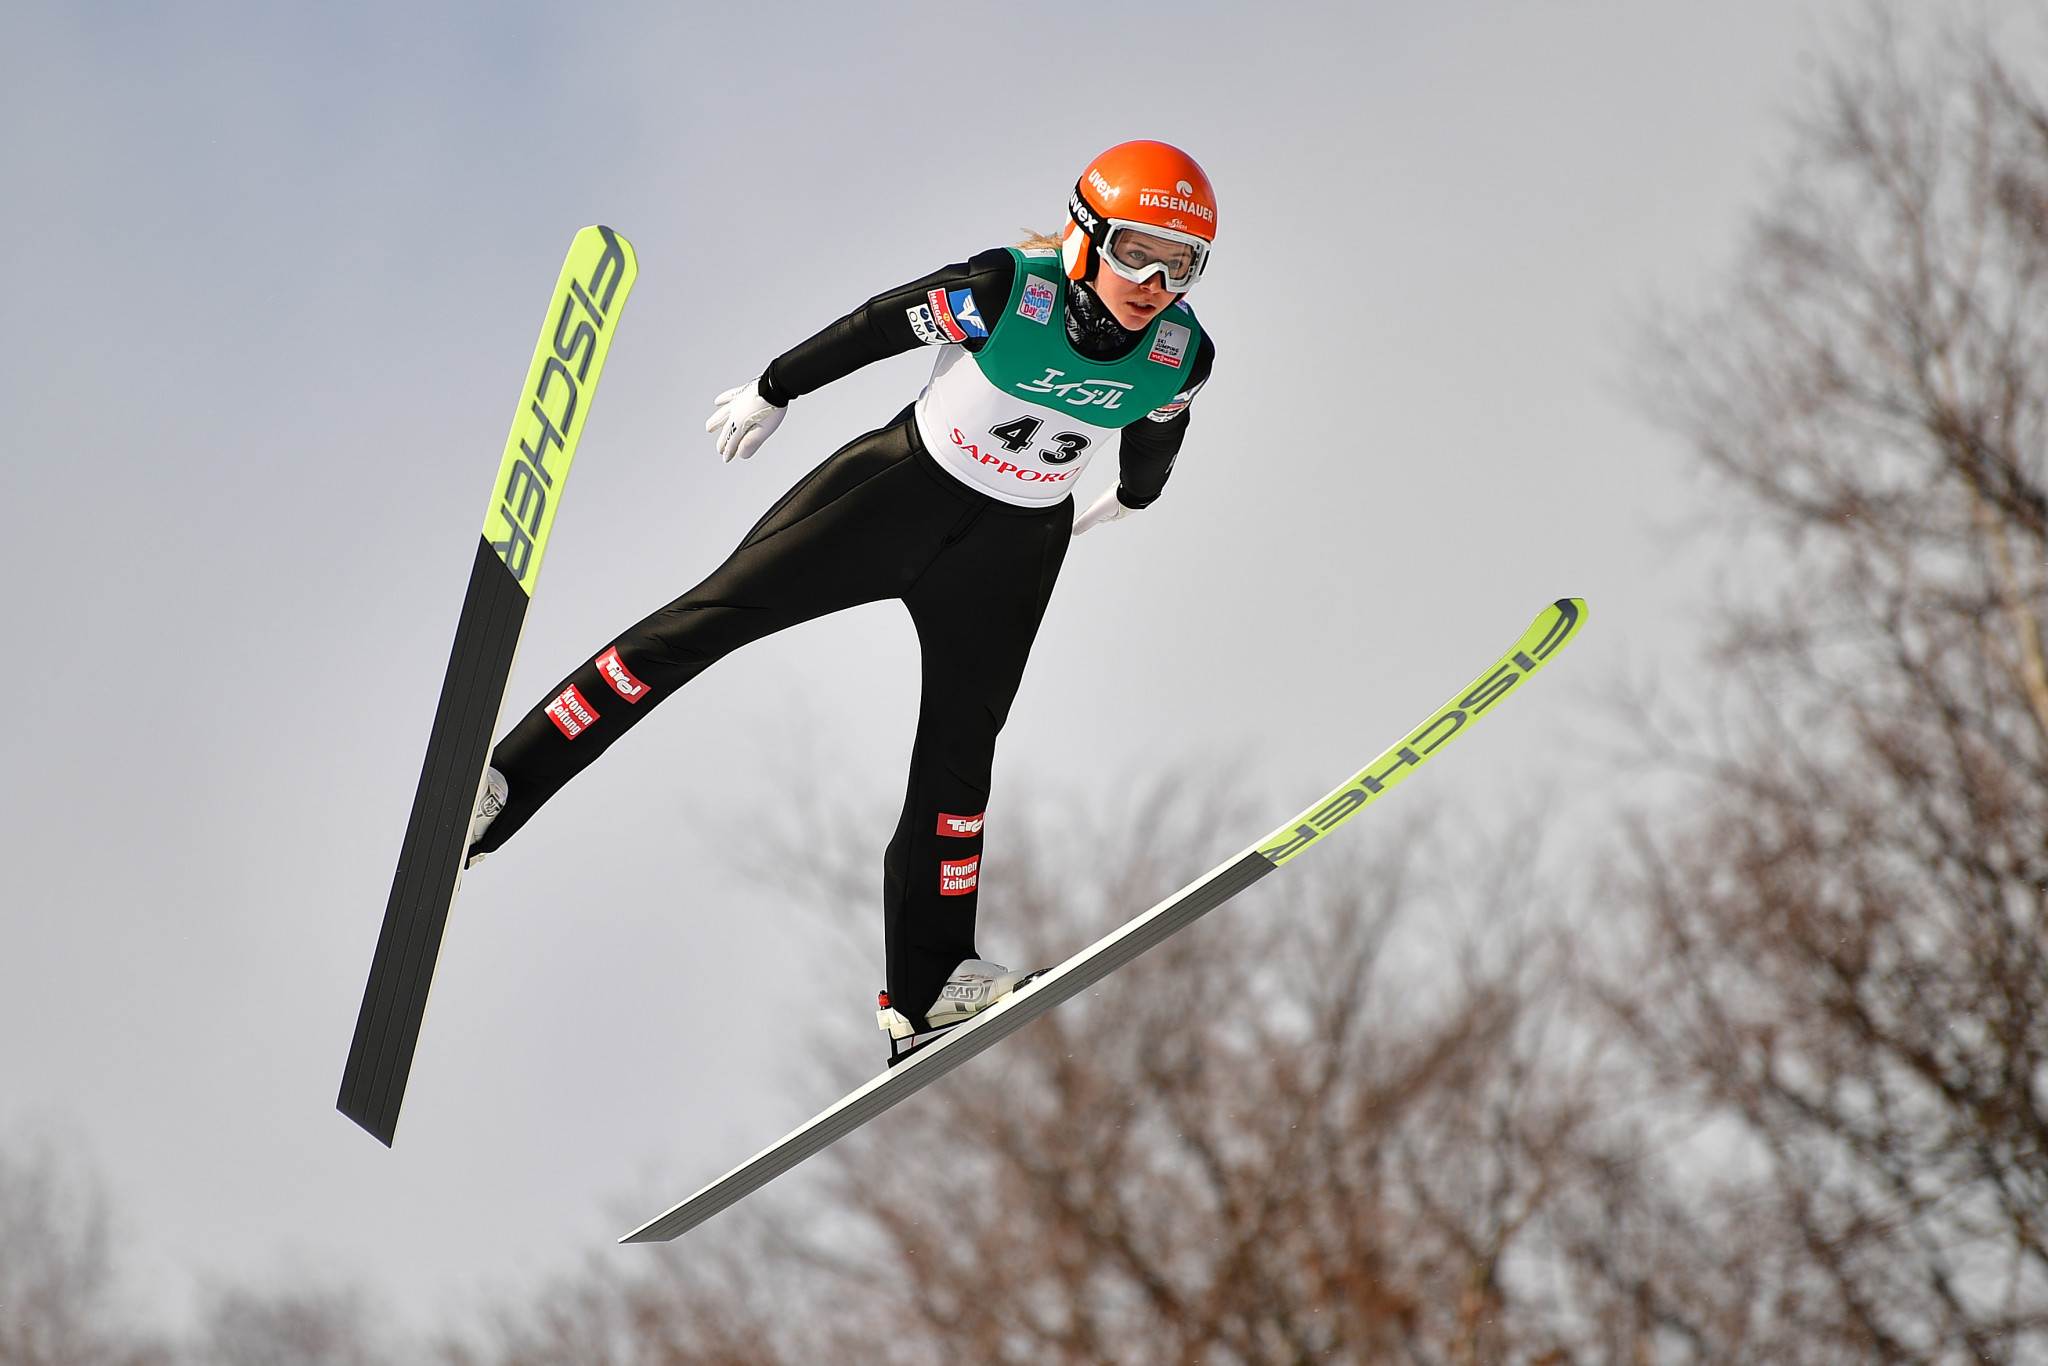 Kramer leads qualifying at FIS Ski Jumping World Cup in Zao